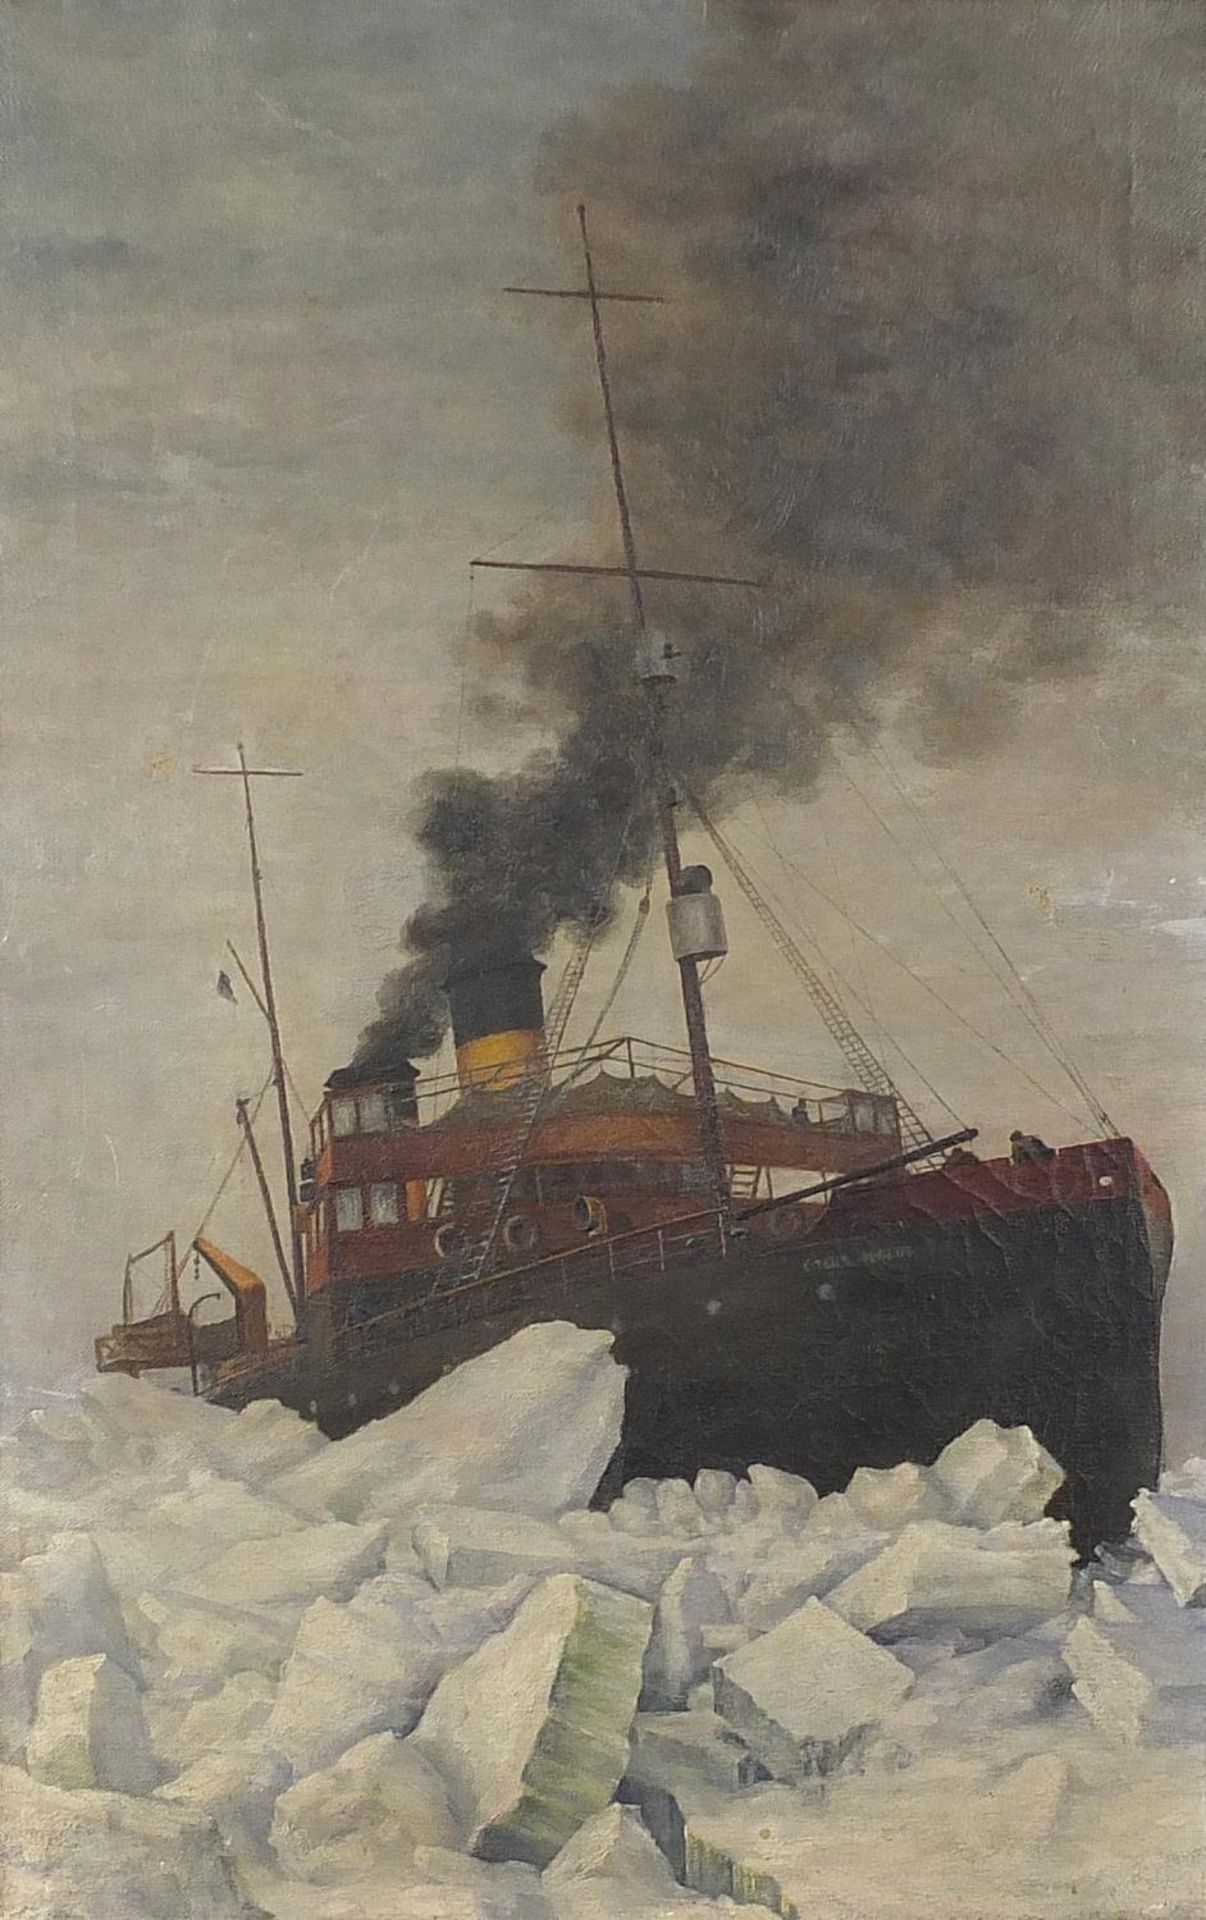 Russian ice breaker, 19th century century oil on canvas, Reeves & Sons stamp verso, mounted and - Image 2 of 10